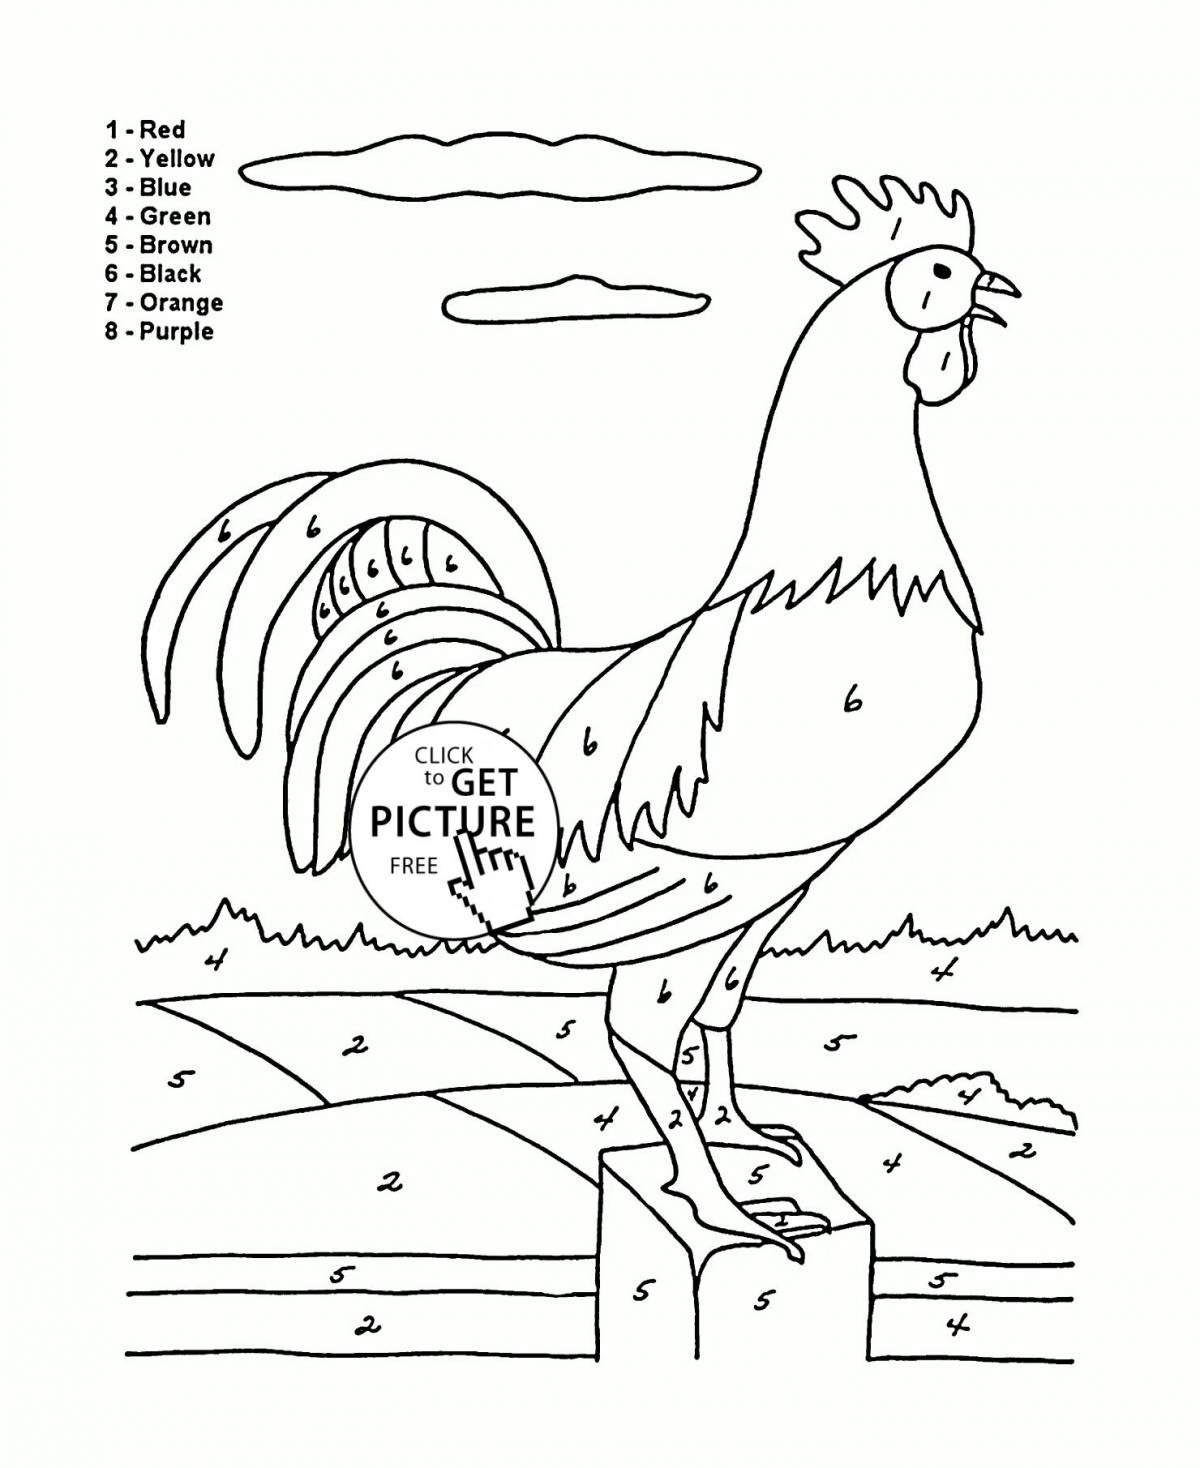 Amazing pet coloring page by number